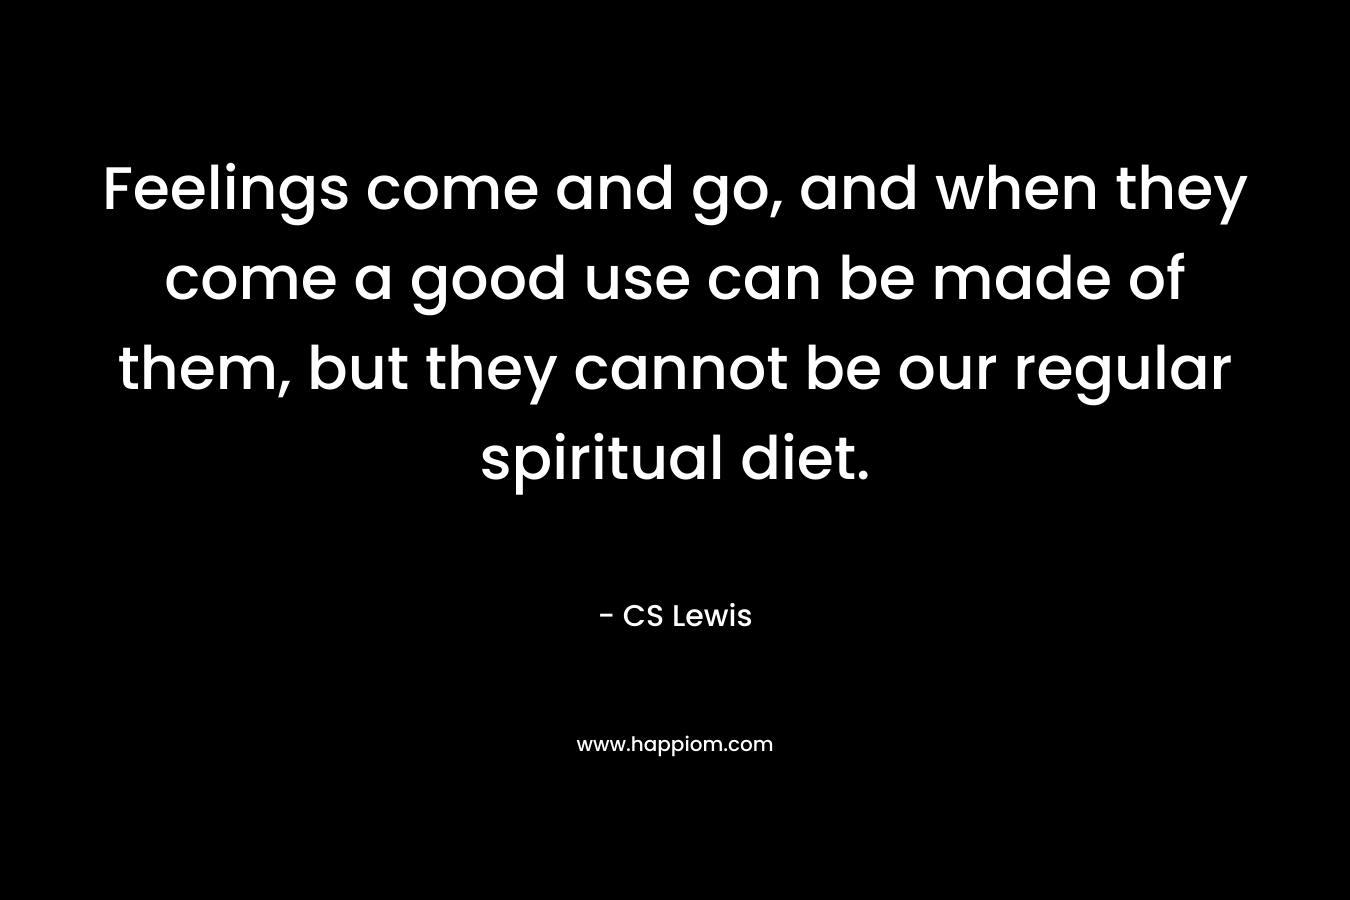 Feelings come and go, and when they come a good use can be made of them, but they cannot be our regular spiritual diet.